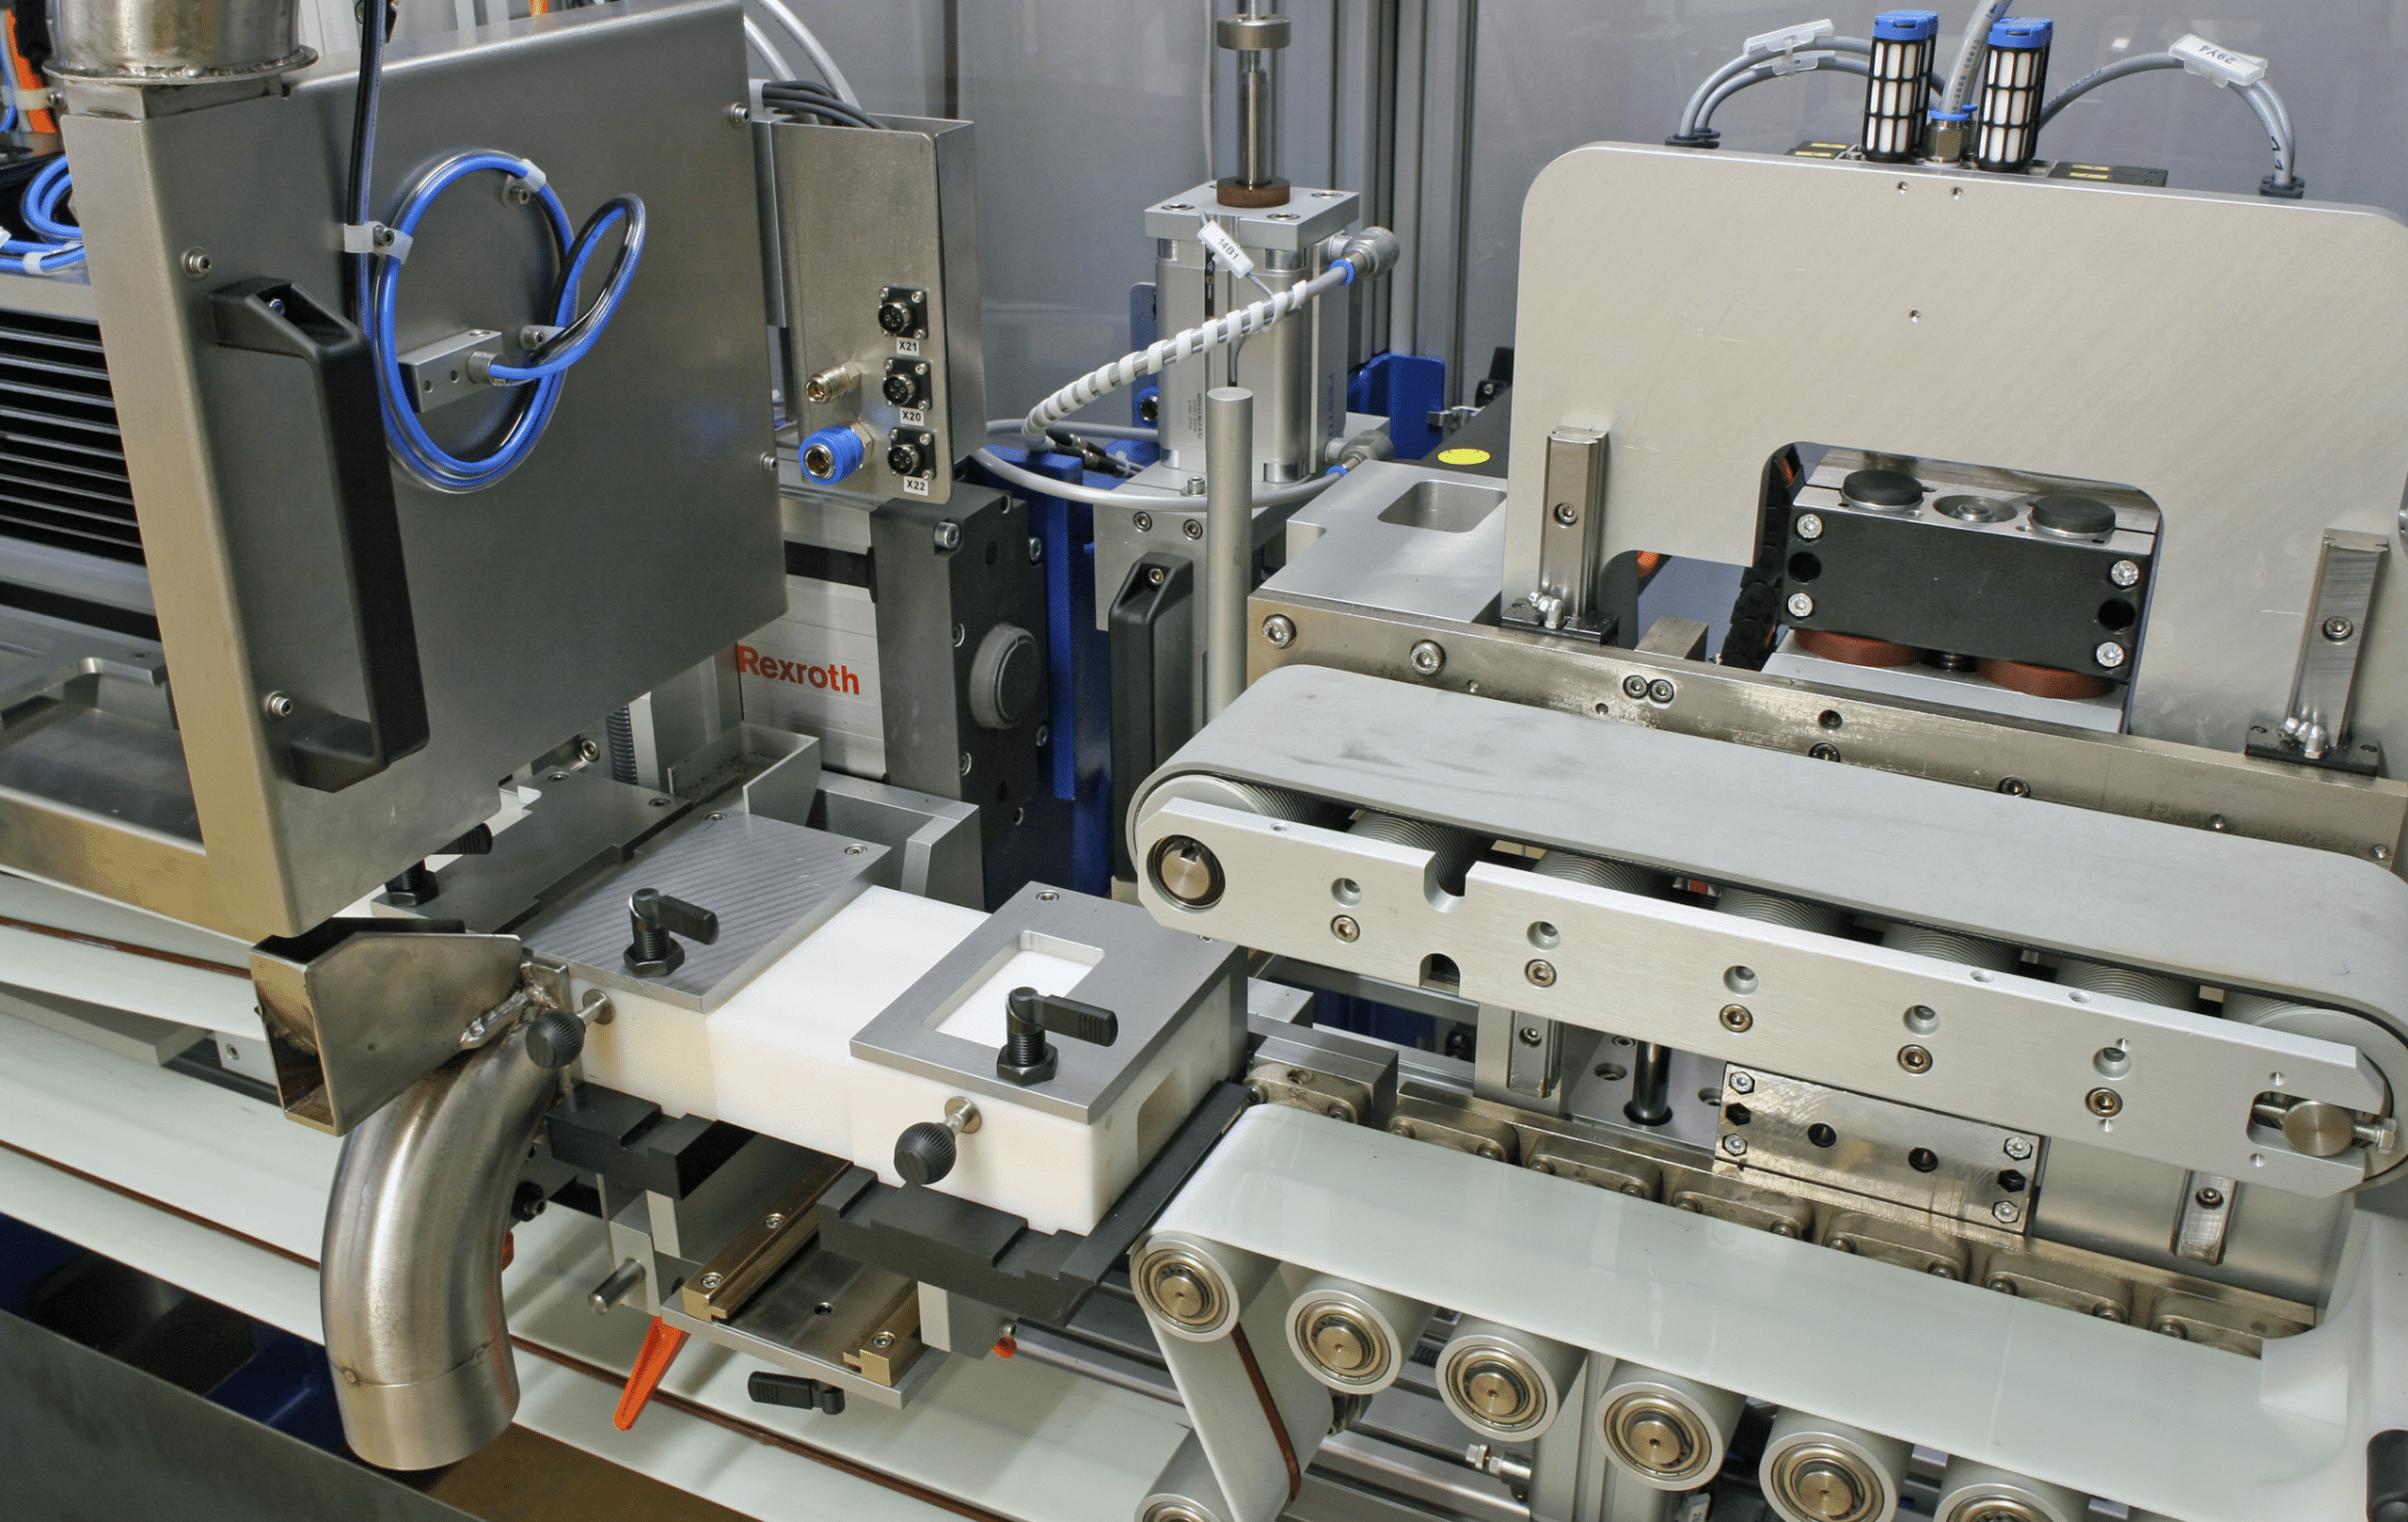 Inside view of the automatic cutting machine CCM 4 with belt and knife